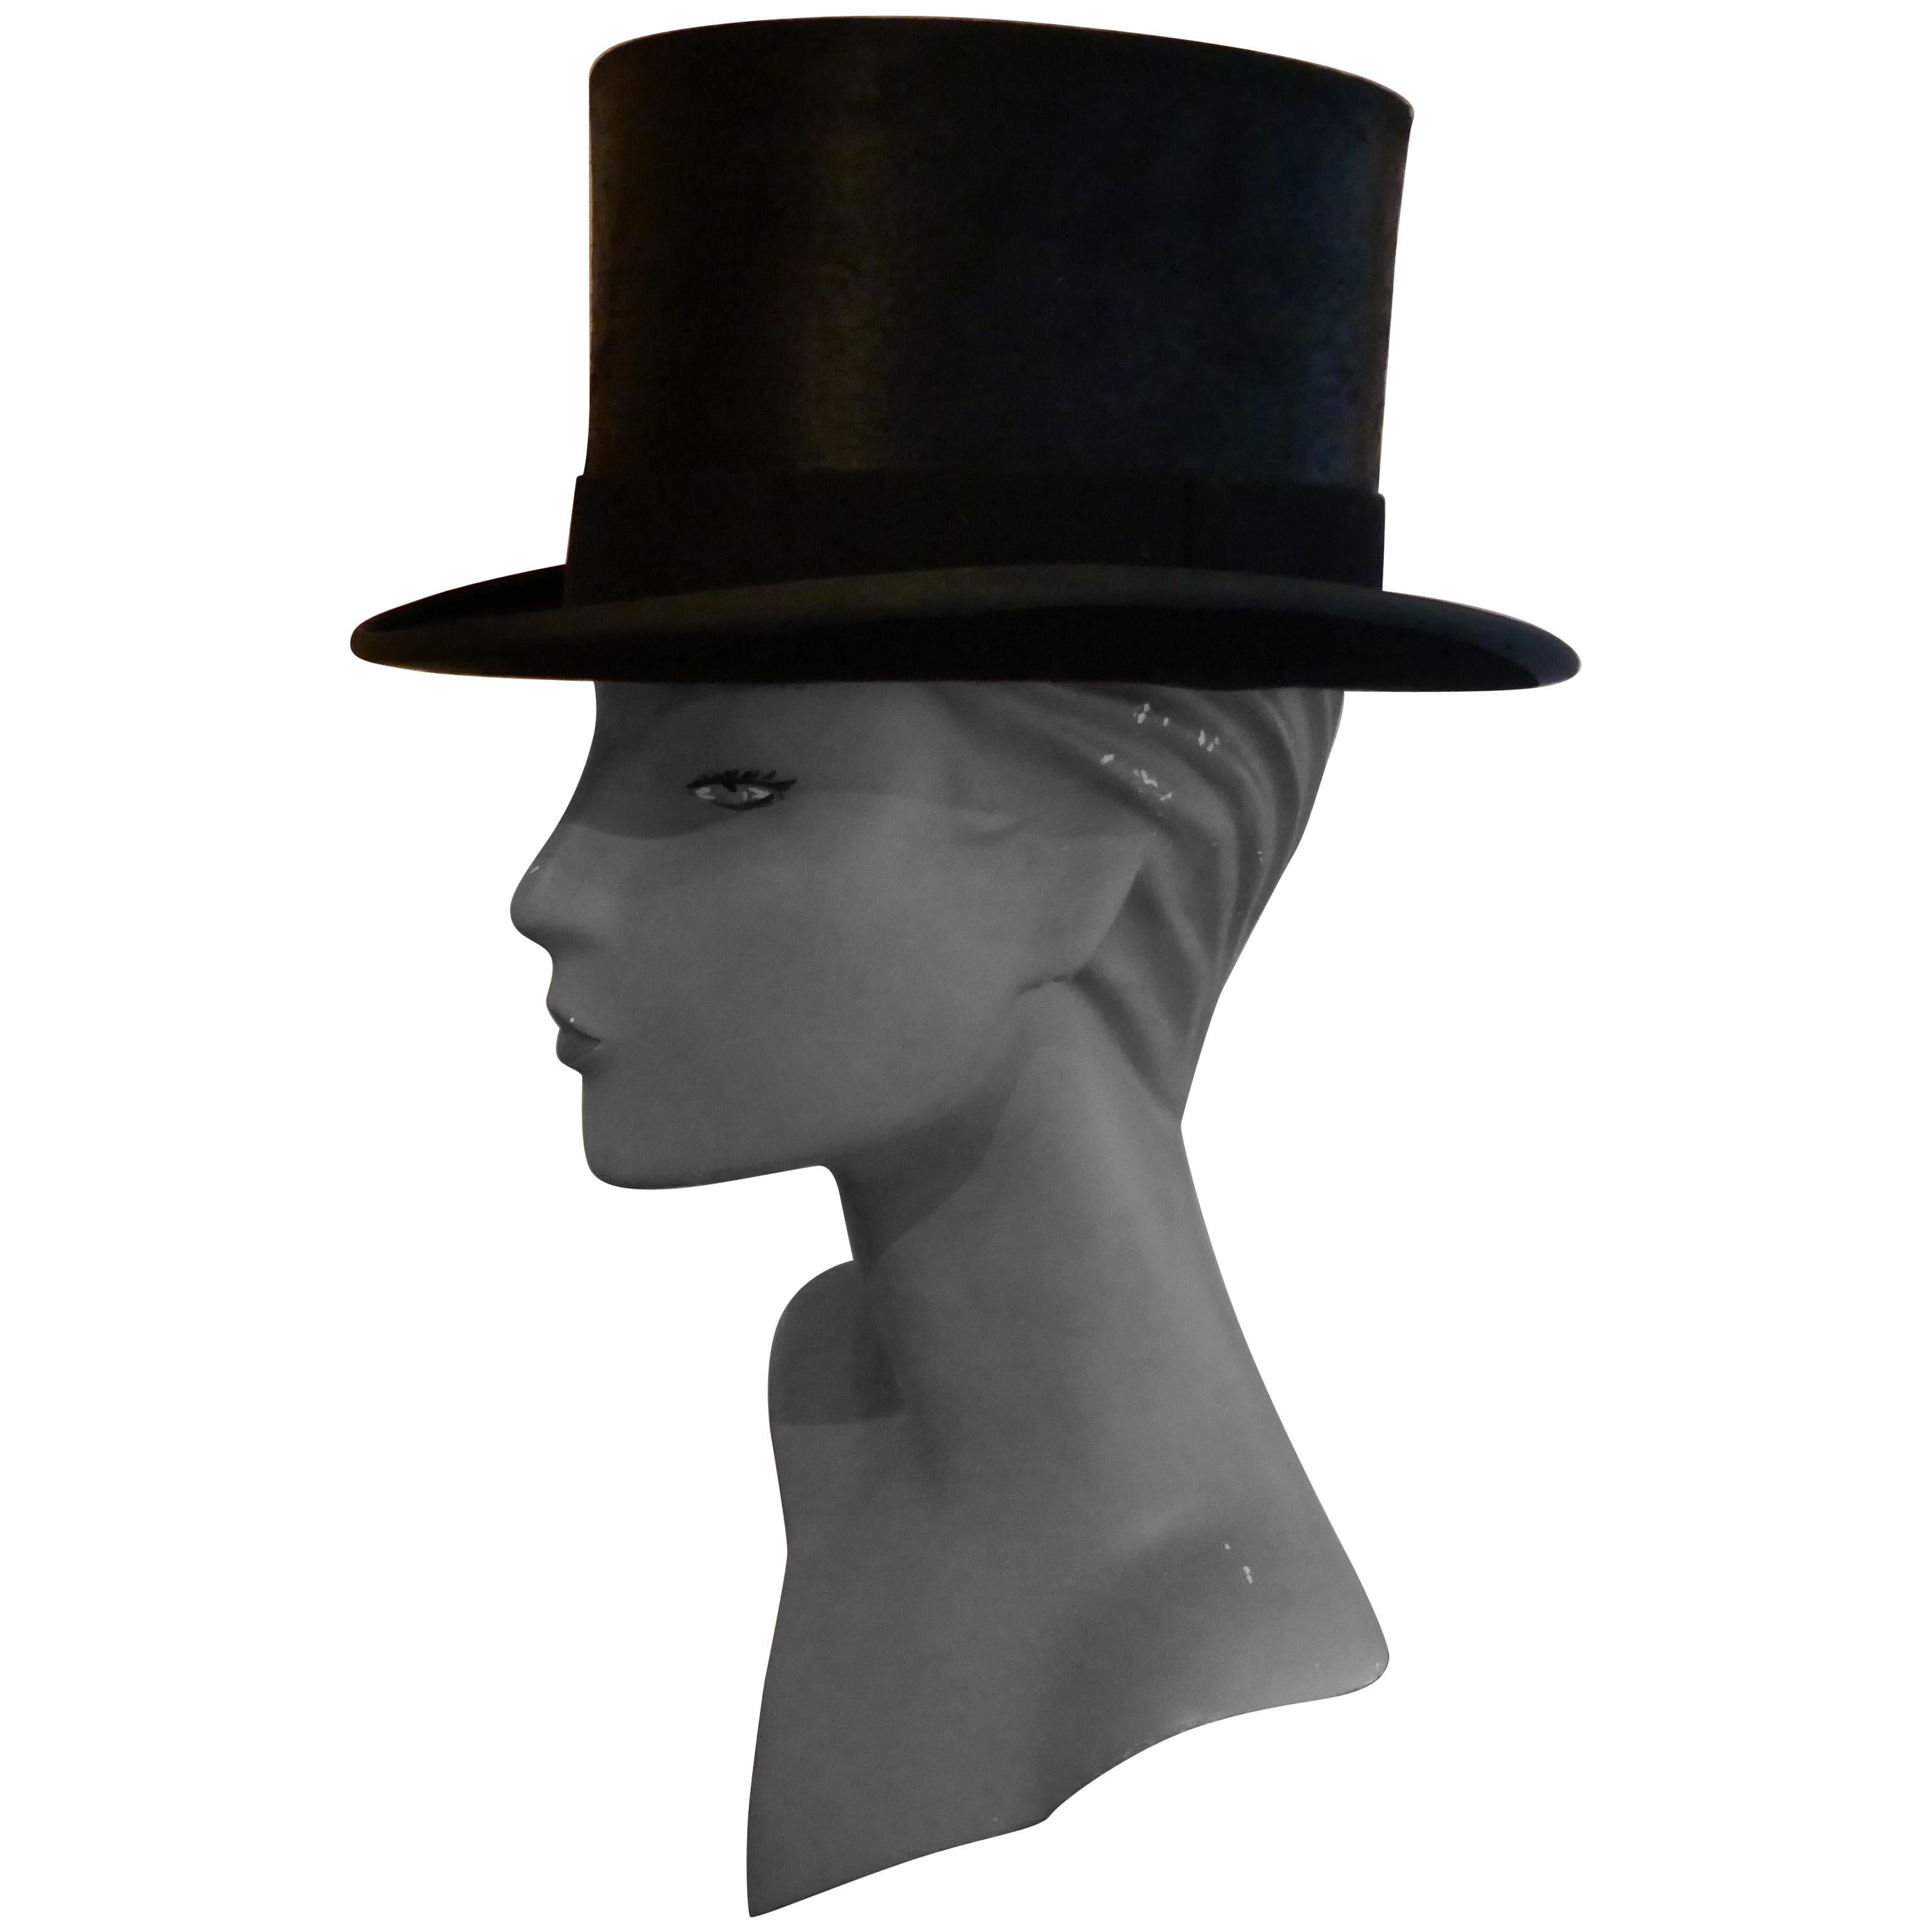 Christy’s Of London Top Hat, Evening Wear, Horse Riding, Dressage or Hunting